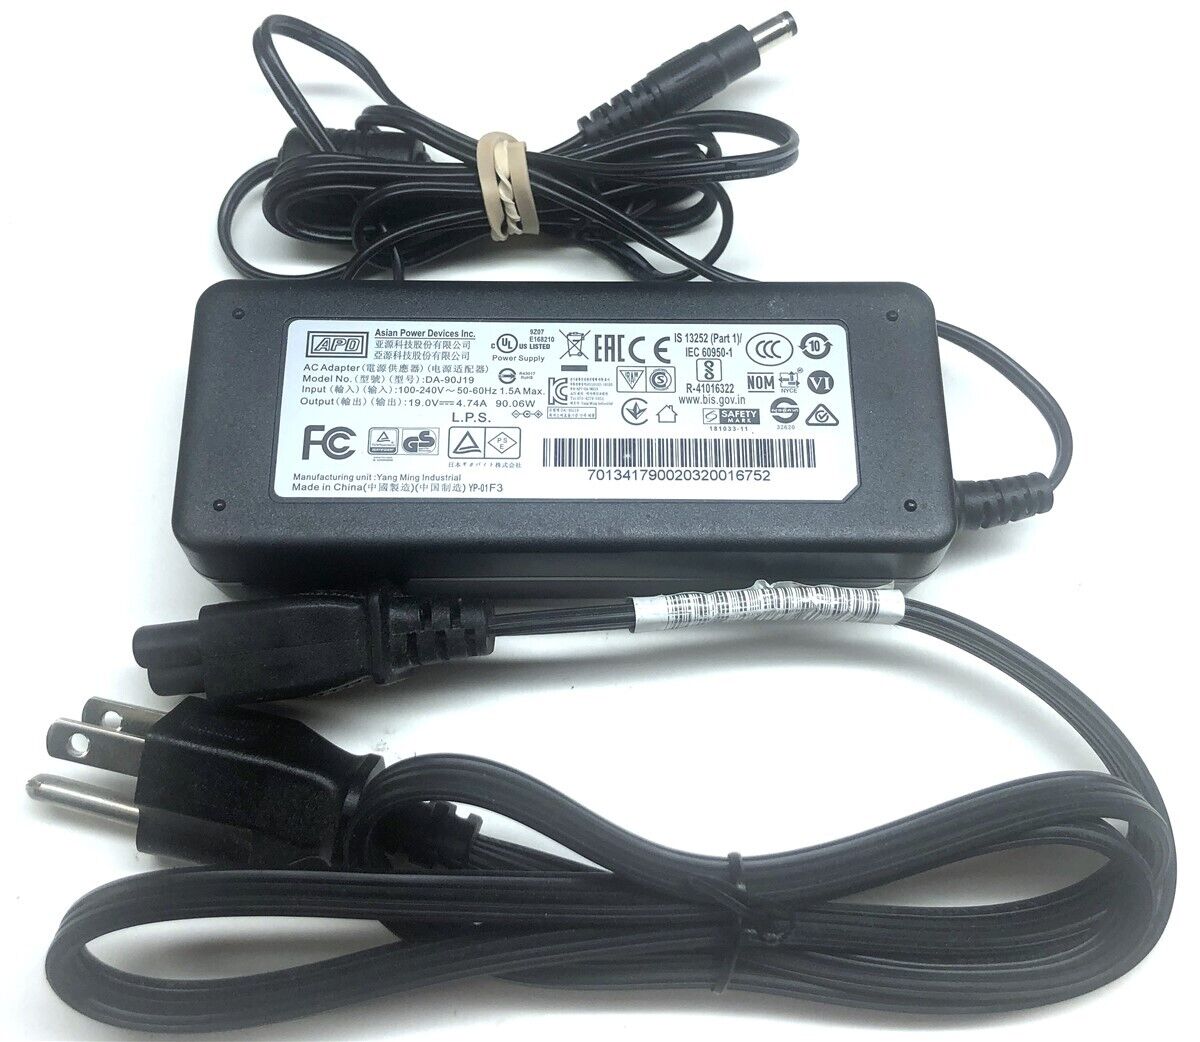 *Brand NEW*Genuine APD Laptop MSI Monitor 19V 4.74A 90W AC Adapter DA-90J19 Power Supply - Click Image to Close